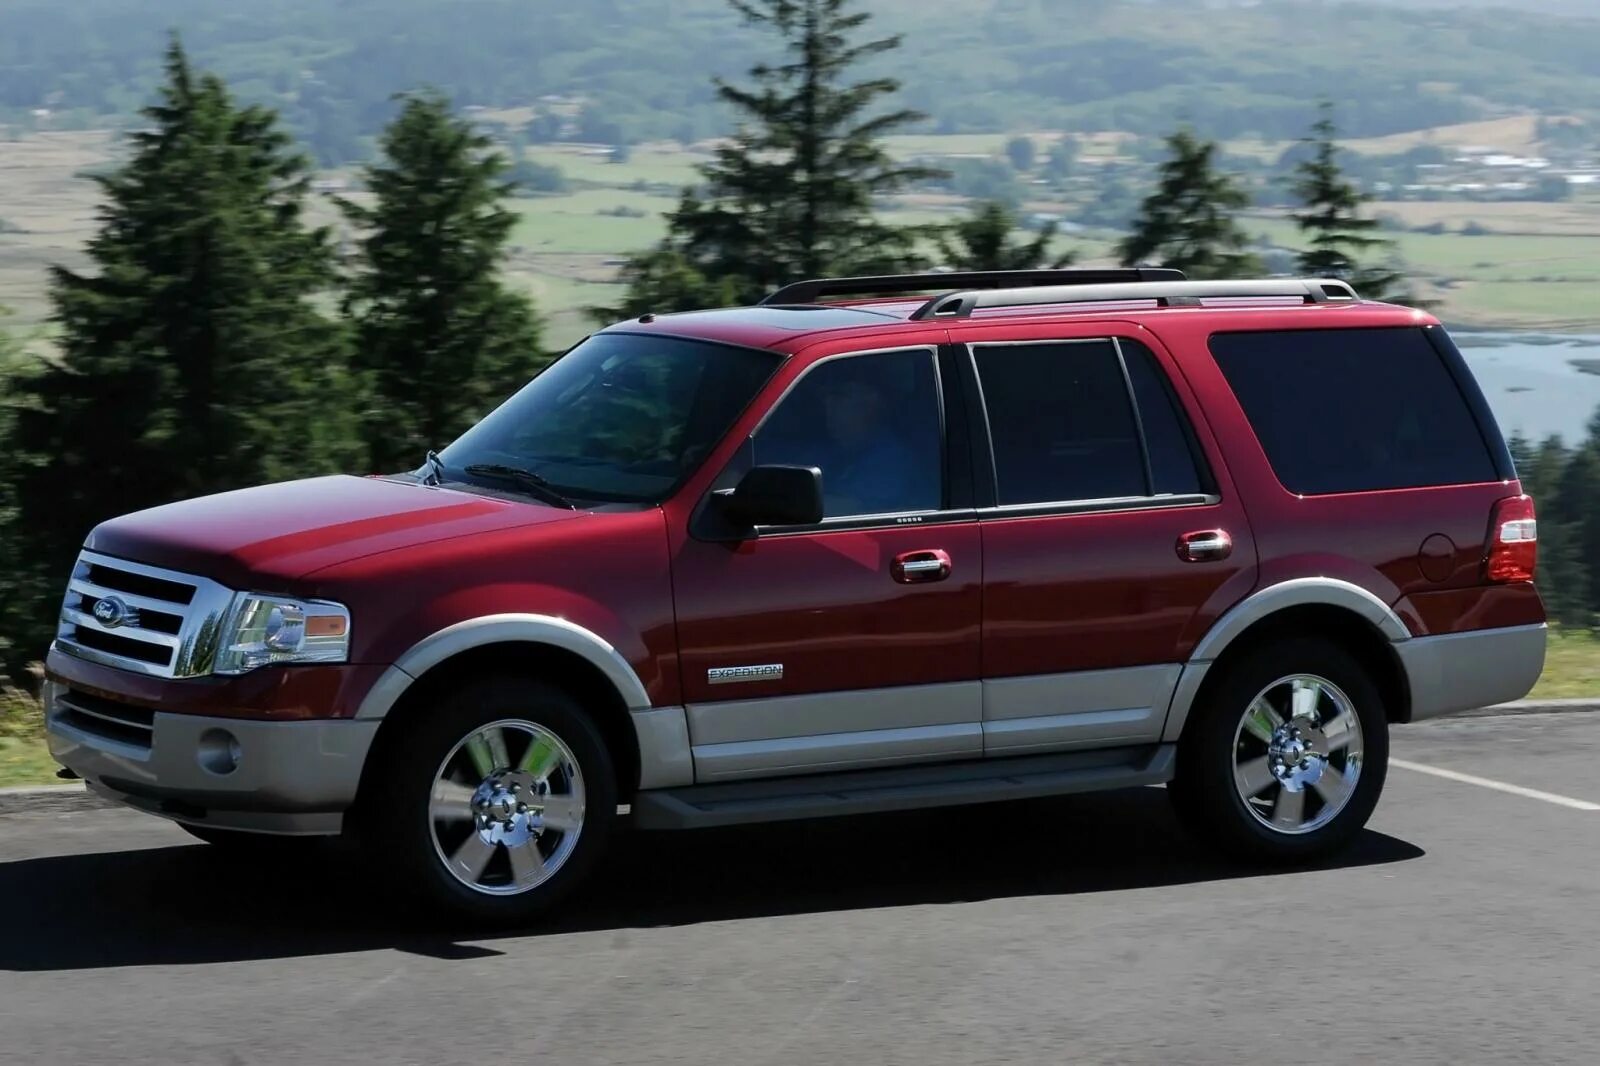 Ford Expedition 2009. Форд Экспедишн 3. Форд Экспедишн 2. Ford Expedition 2007.